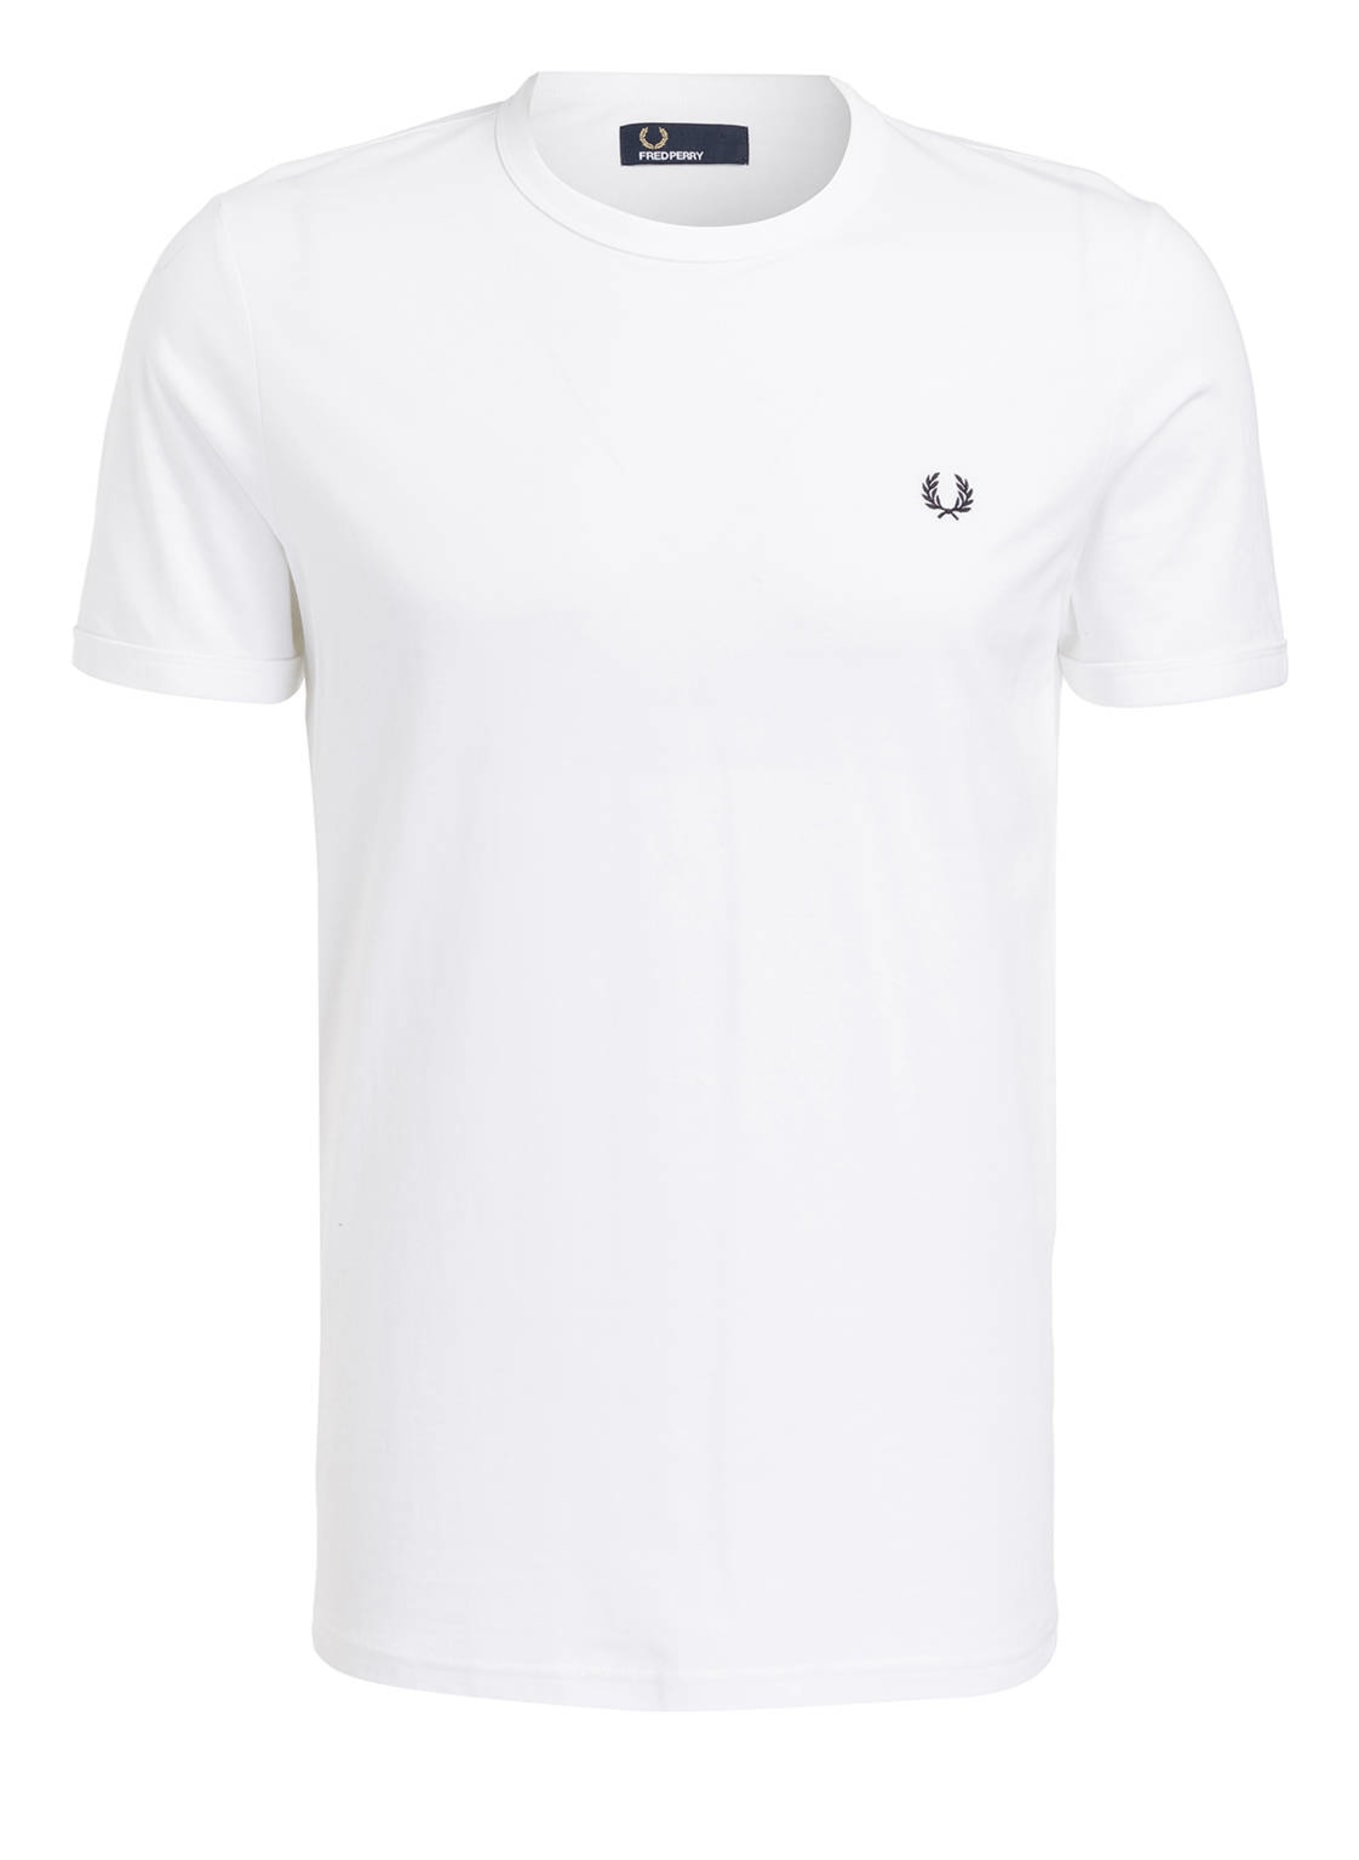 FRED PERRY T-Shirt RINGER, Farbe: WEISS (Bild 1)